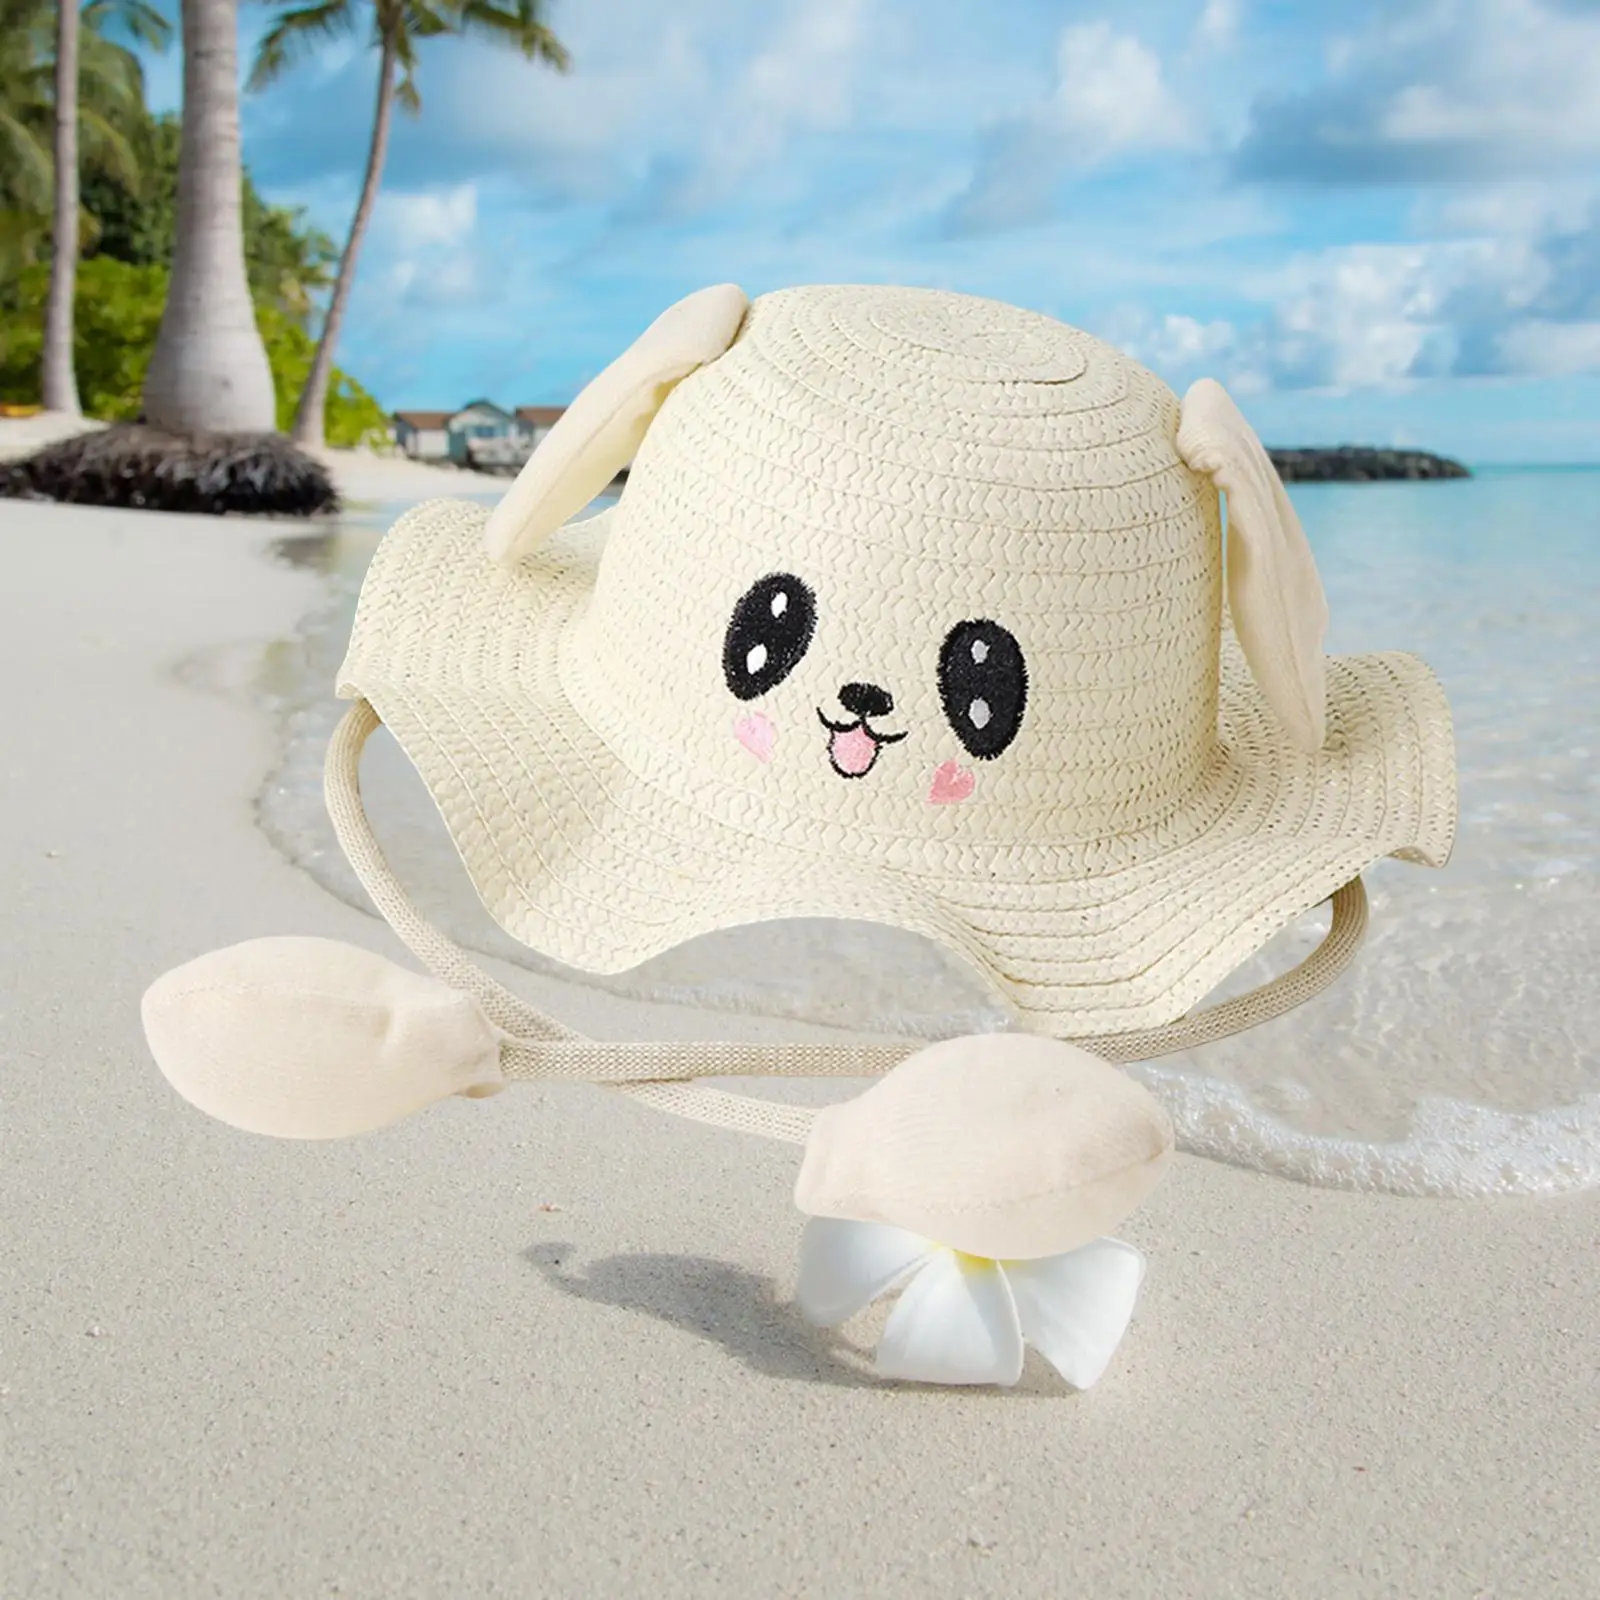 Rabbit Ear Straw Hat Fisherman Cap with Ears Moving Beach Hat Sun Hat for Costume Beach Summer Outdoor